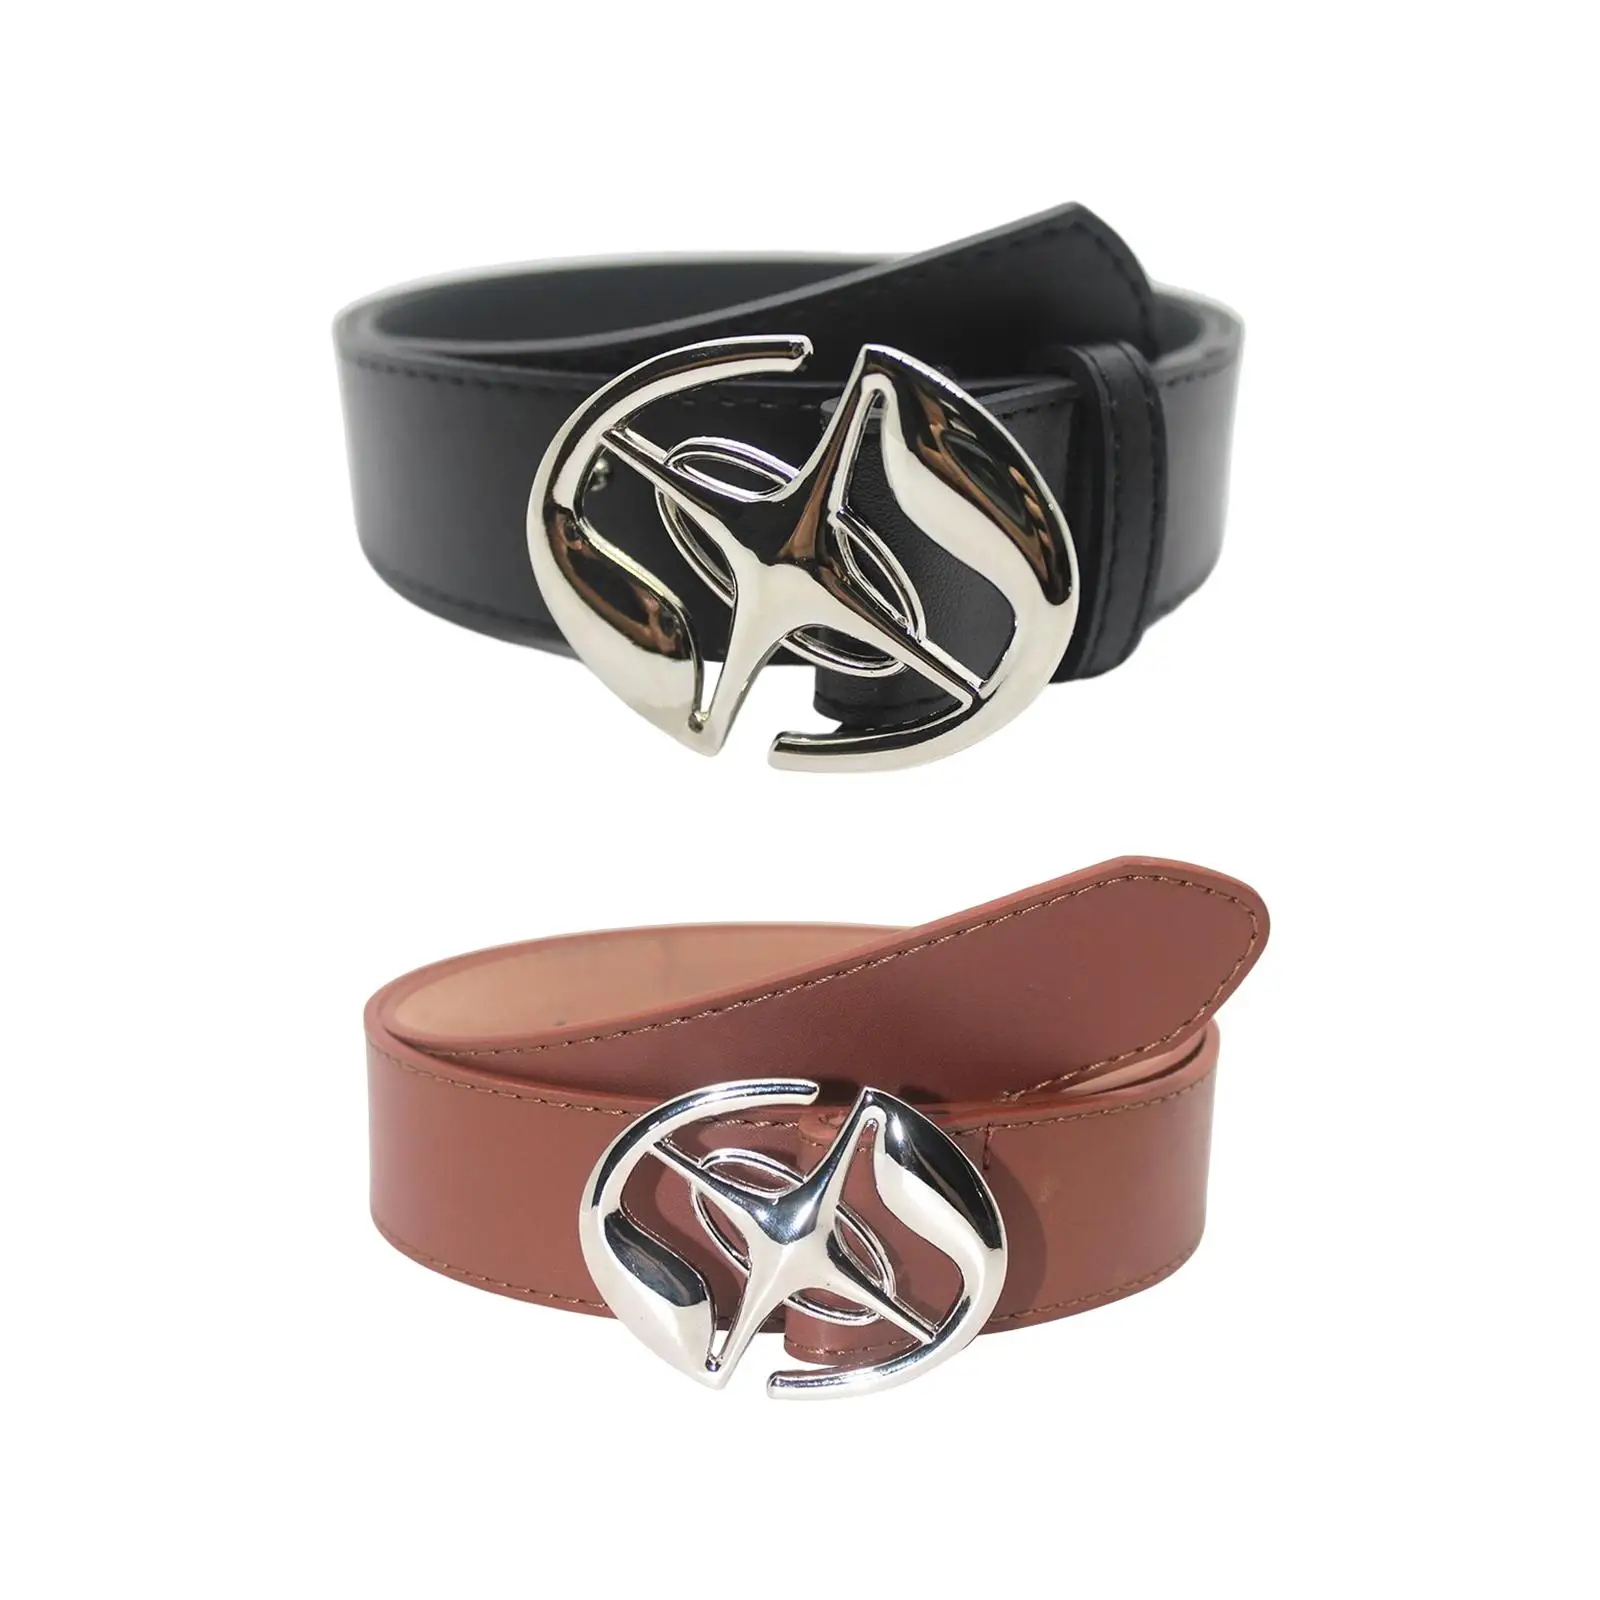 PU Leather Belt for Men Ladies Belts with Metal Pin Buckle Casual Dress Waist Belt Fashion Jeans Belt for Pants Work Outdoor